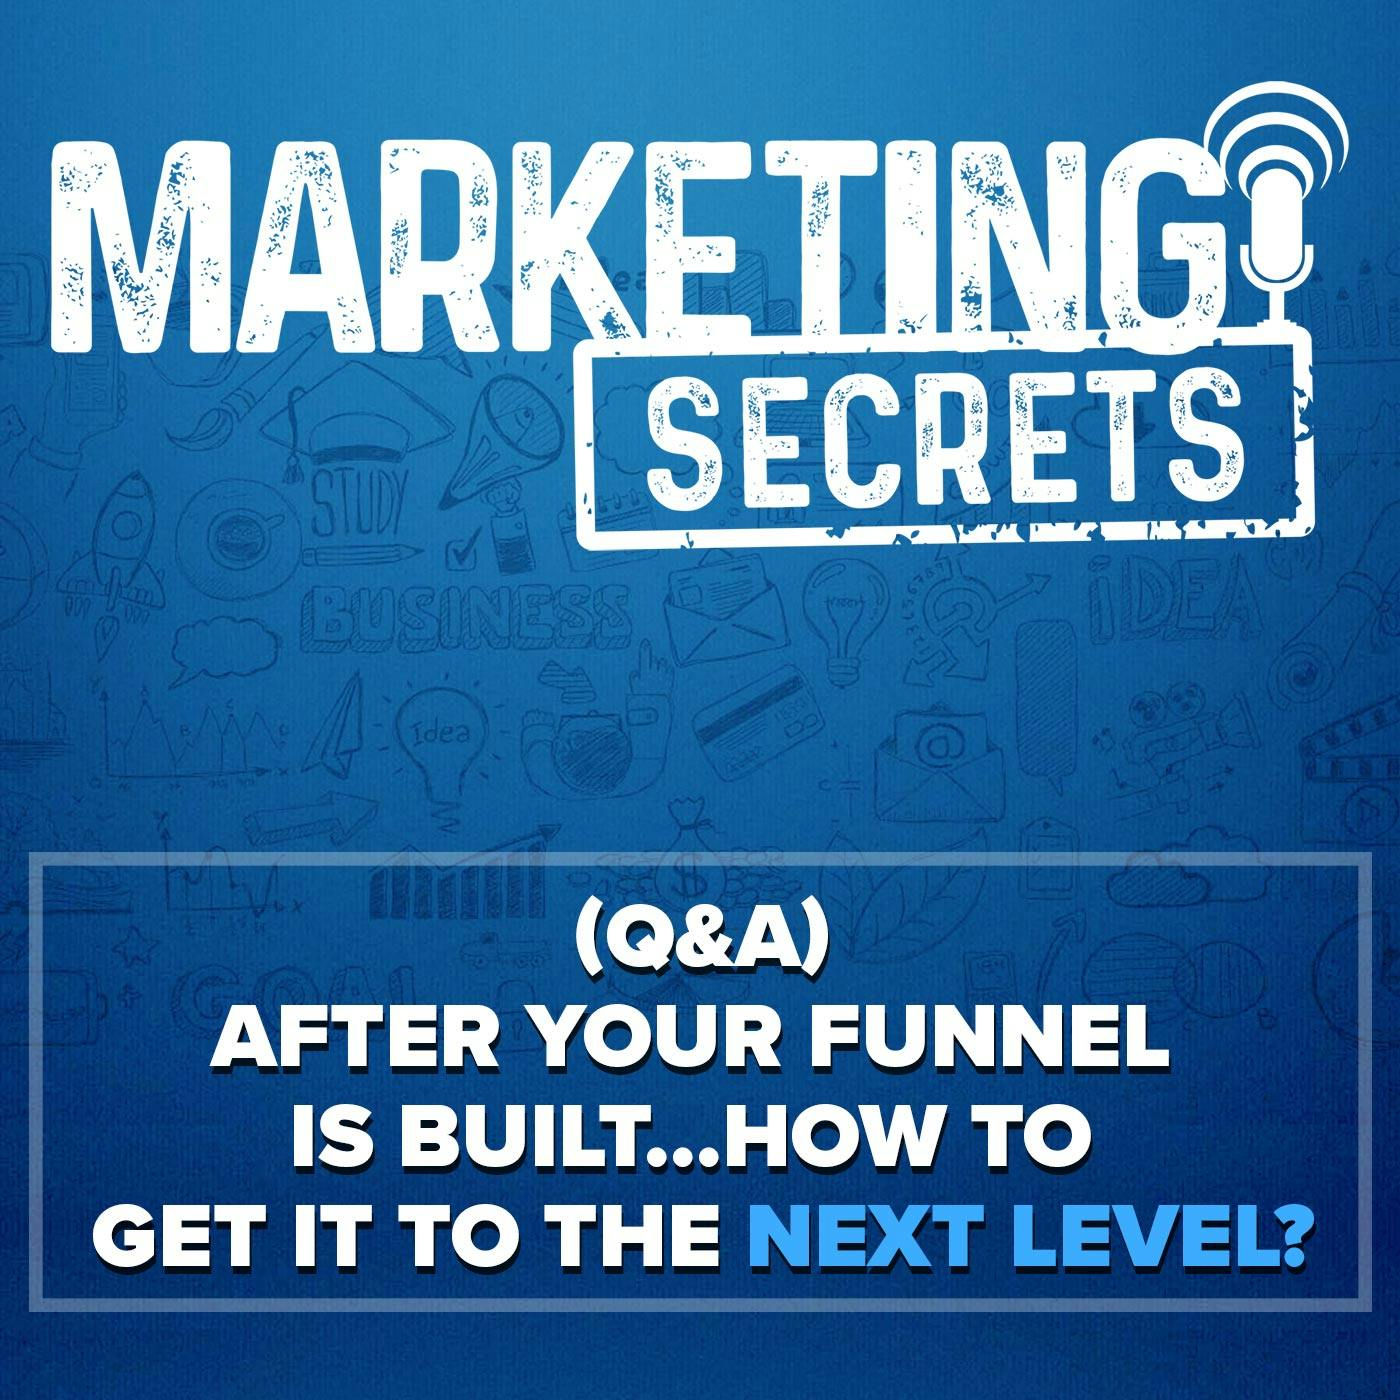 (Q&A) After Your Funnel Is Built... How To Get It To The Next Level?